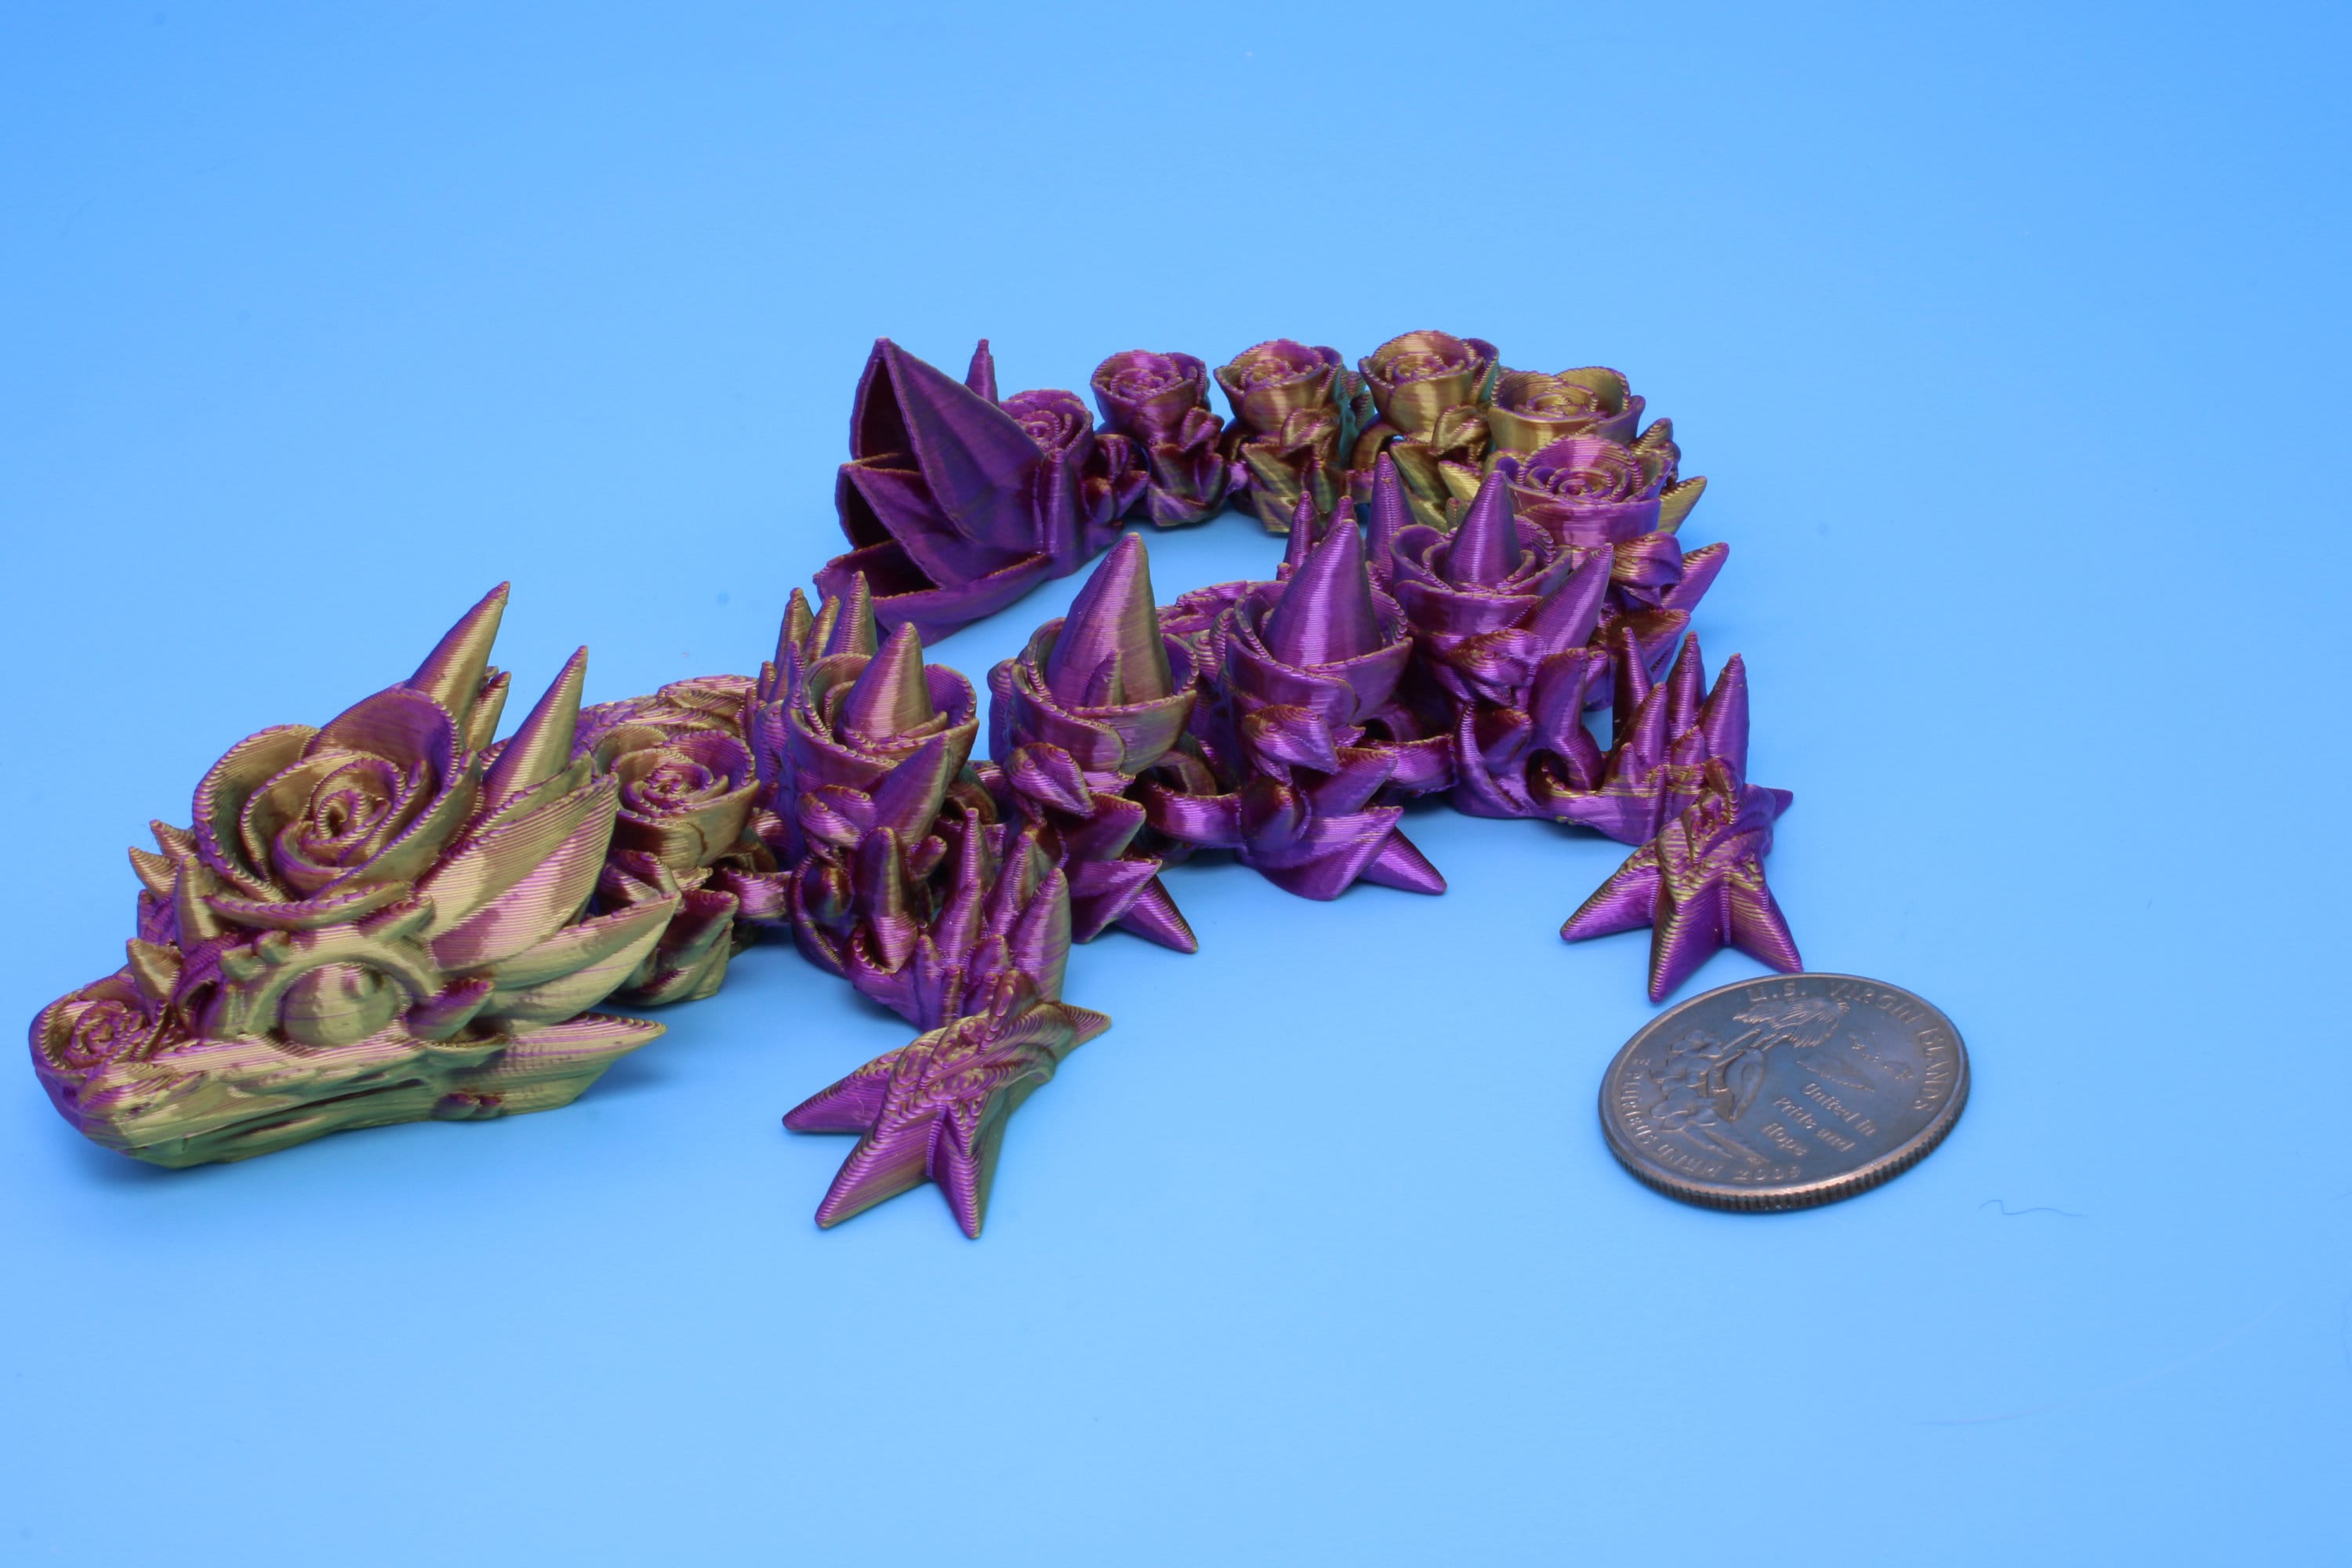 Baby Rose Dragon | Miniature | 3D Printed | Fidget | Flexi Toy 8.5 in. | Stress Relief Gift